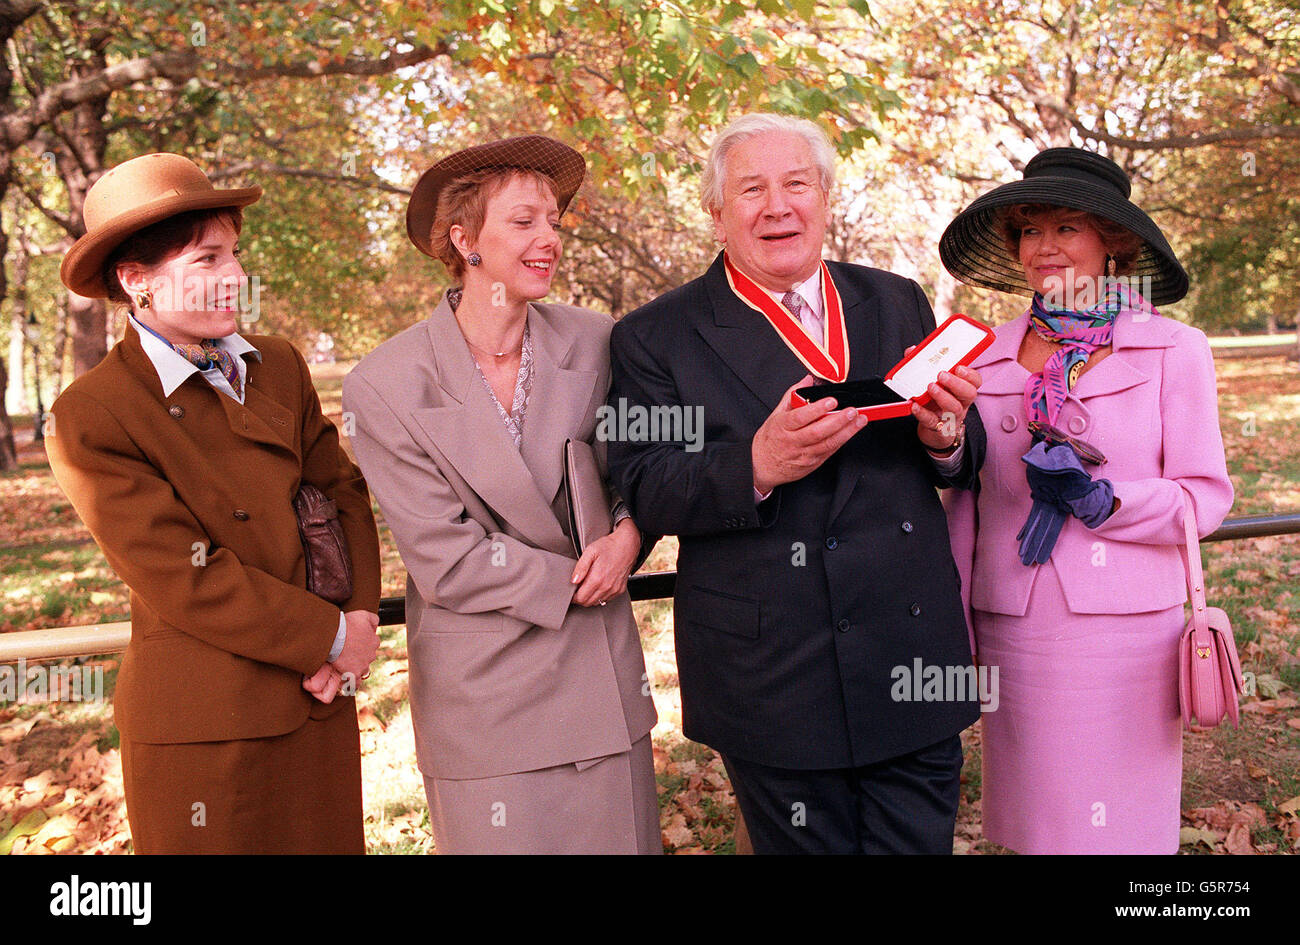 Sir Peter Ustinov, who was knighted at Buckingham Palace is shown with his wife, Lady Helene (right) and daughters Tamara (left) and Andrea (far left). 29/03/2004: veteran British actor Sir Peter Ustinov, who died in Switzerland last night aged 82, it was announced, Monday March 29, 2004. Stock Photo